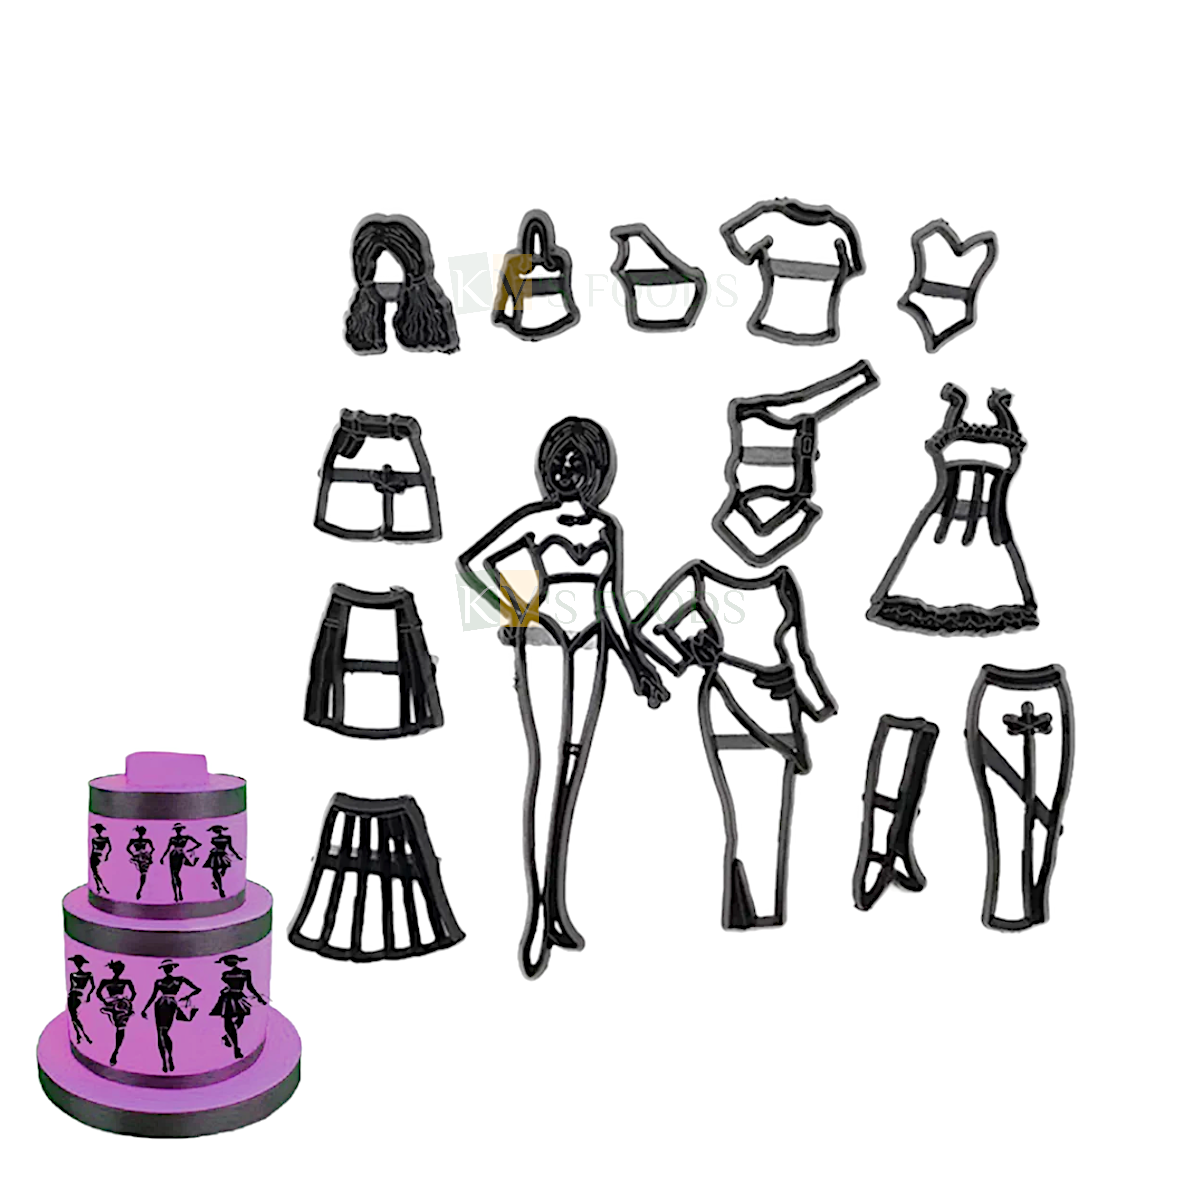 14 PCS Black Lady Fashion Girl, Dresses, Tshirt, Pants, Skirts, Patchwork, Female Figure Fondant Silhouette Plunger Cutters Stamps, Embossing Molds Presses Impression, Pancake Cookies Birthday Theme